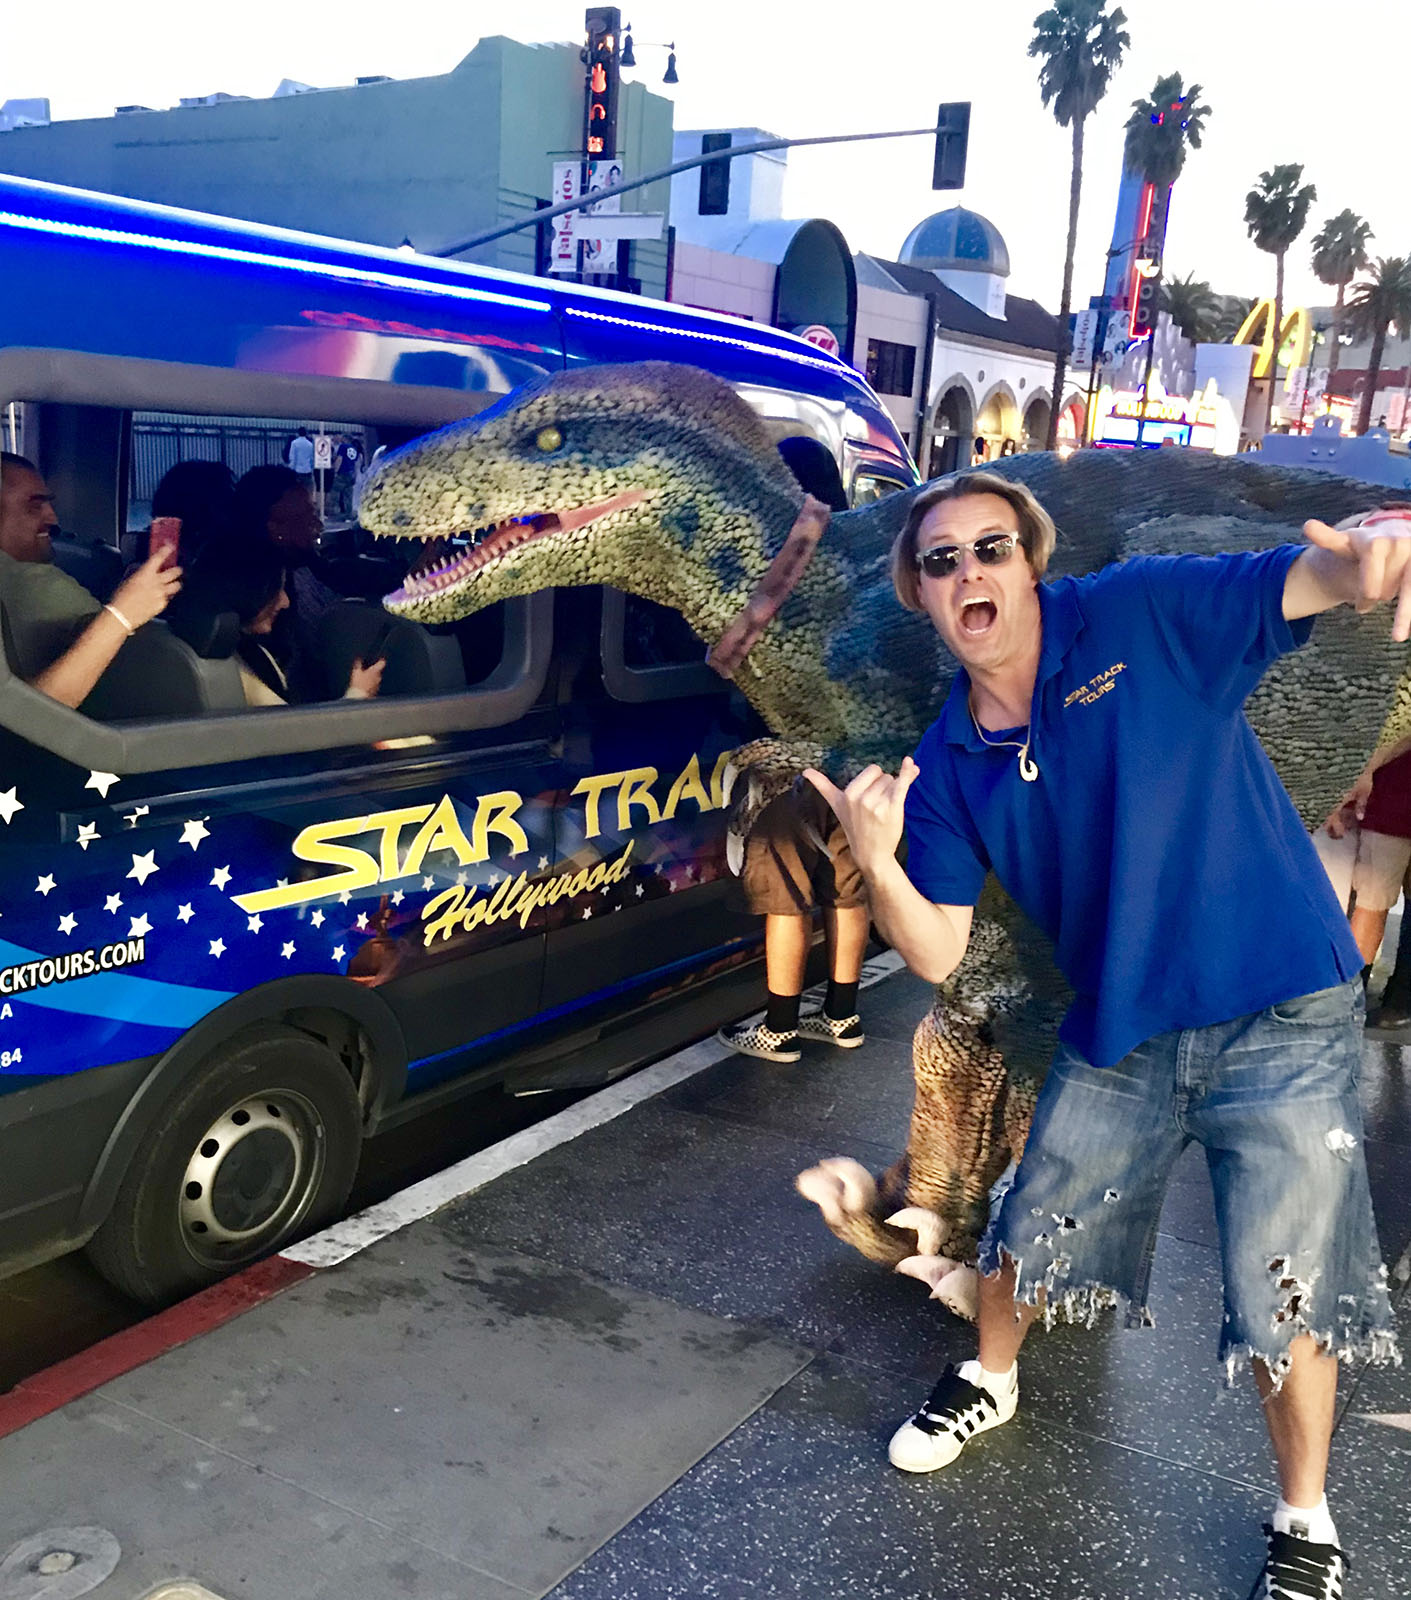 Hollywood tours, Home, StarTrackTours